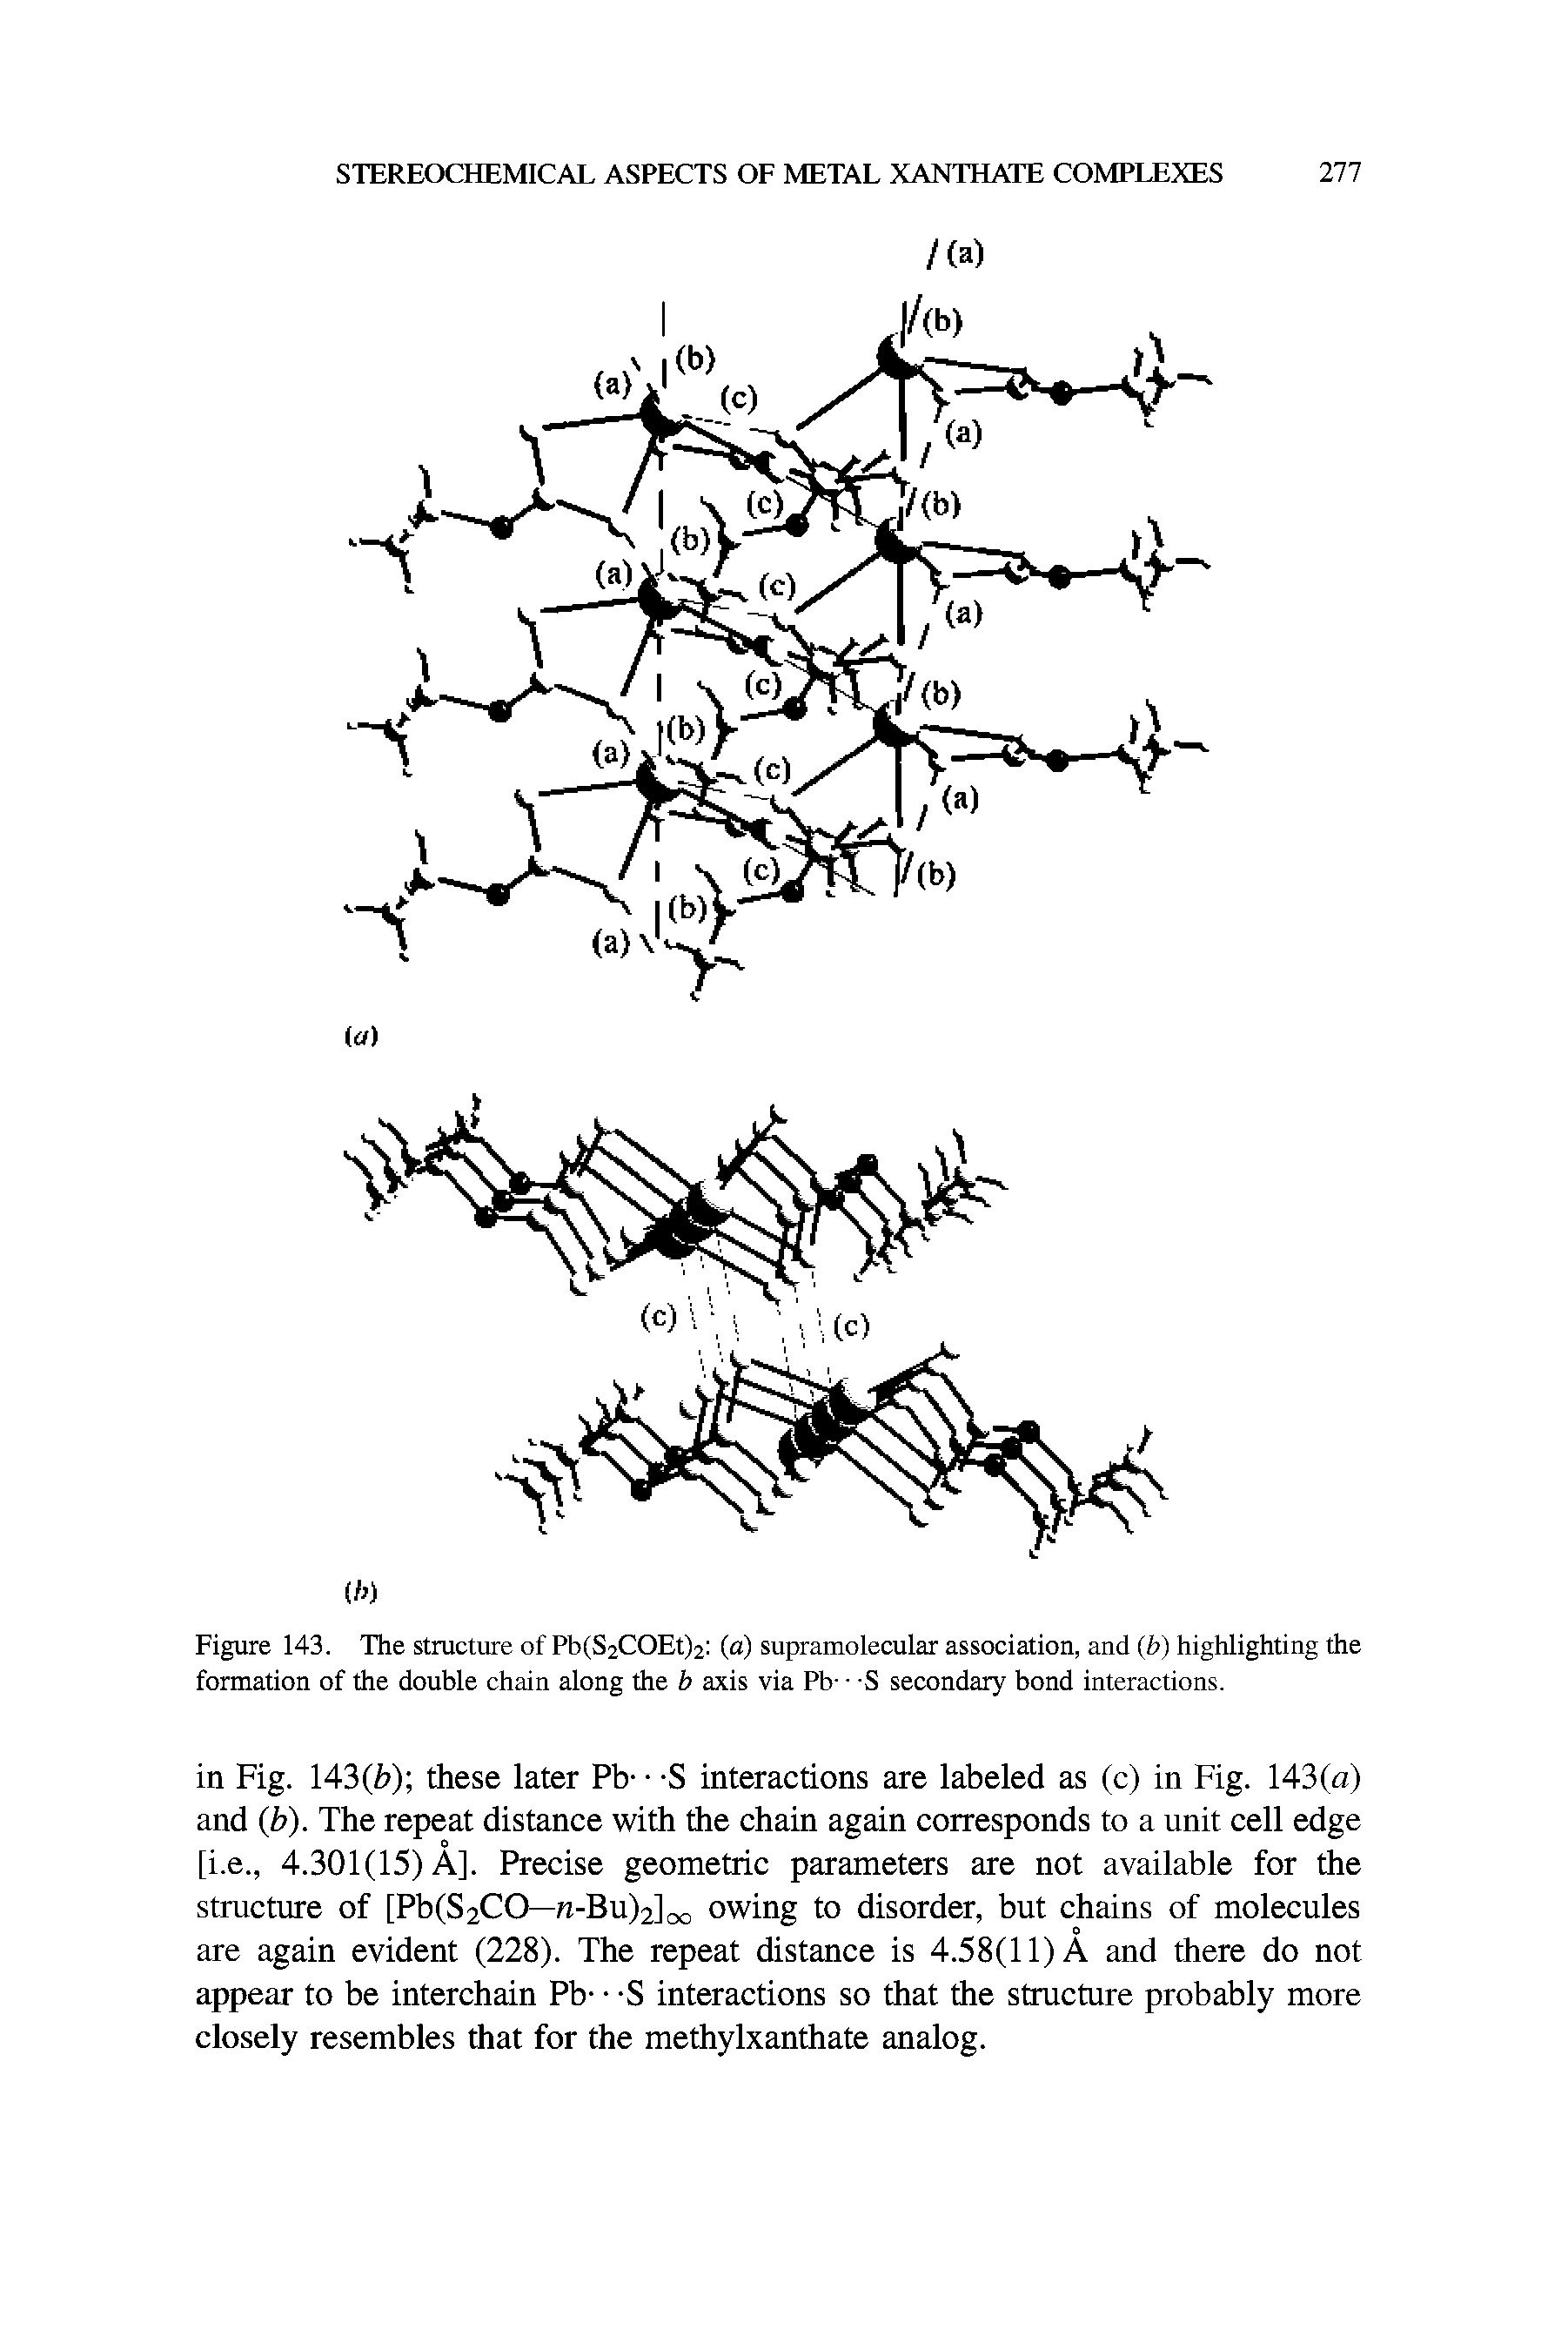 Figure 143. The structure of Pb(S2COEt)2 (a) supramolecular association, and (b) highlighting the formation of the double chain along the b axis via Pb- -S secondary bond interactions.